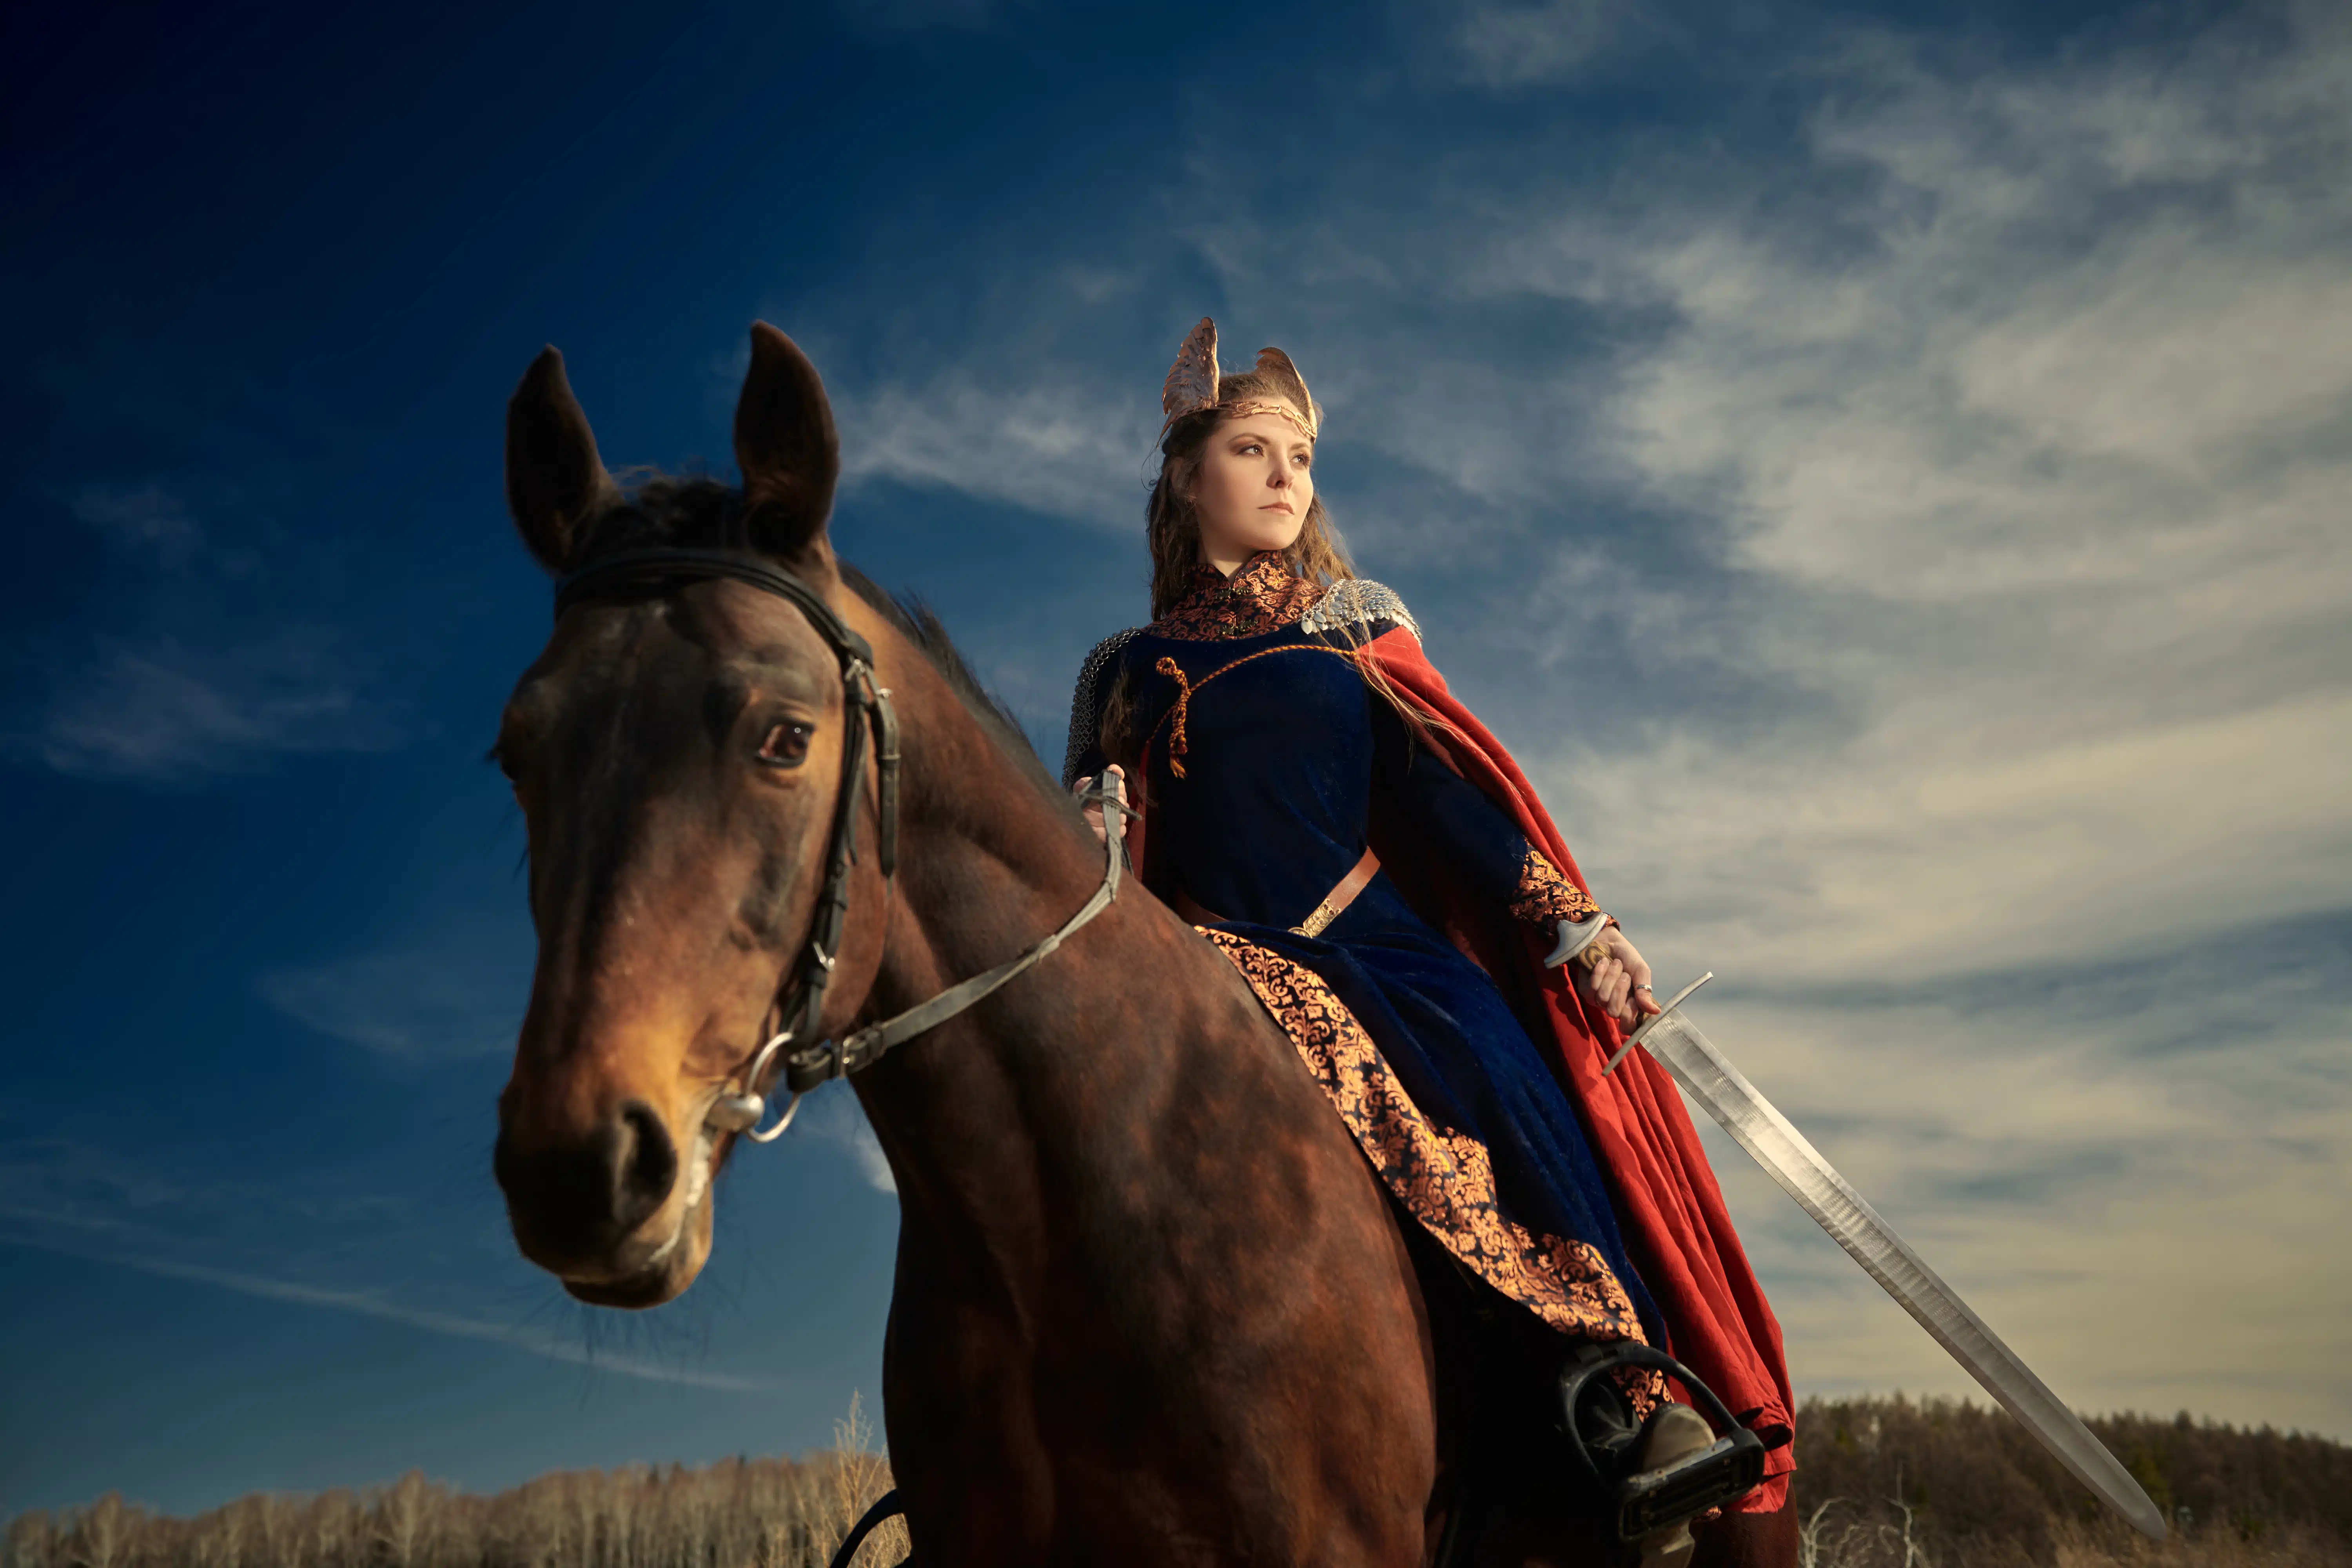 female medieval warrior holding a sword while riding a brown horse